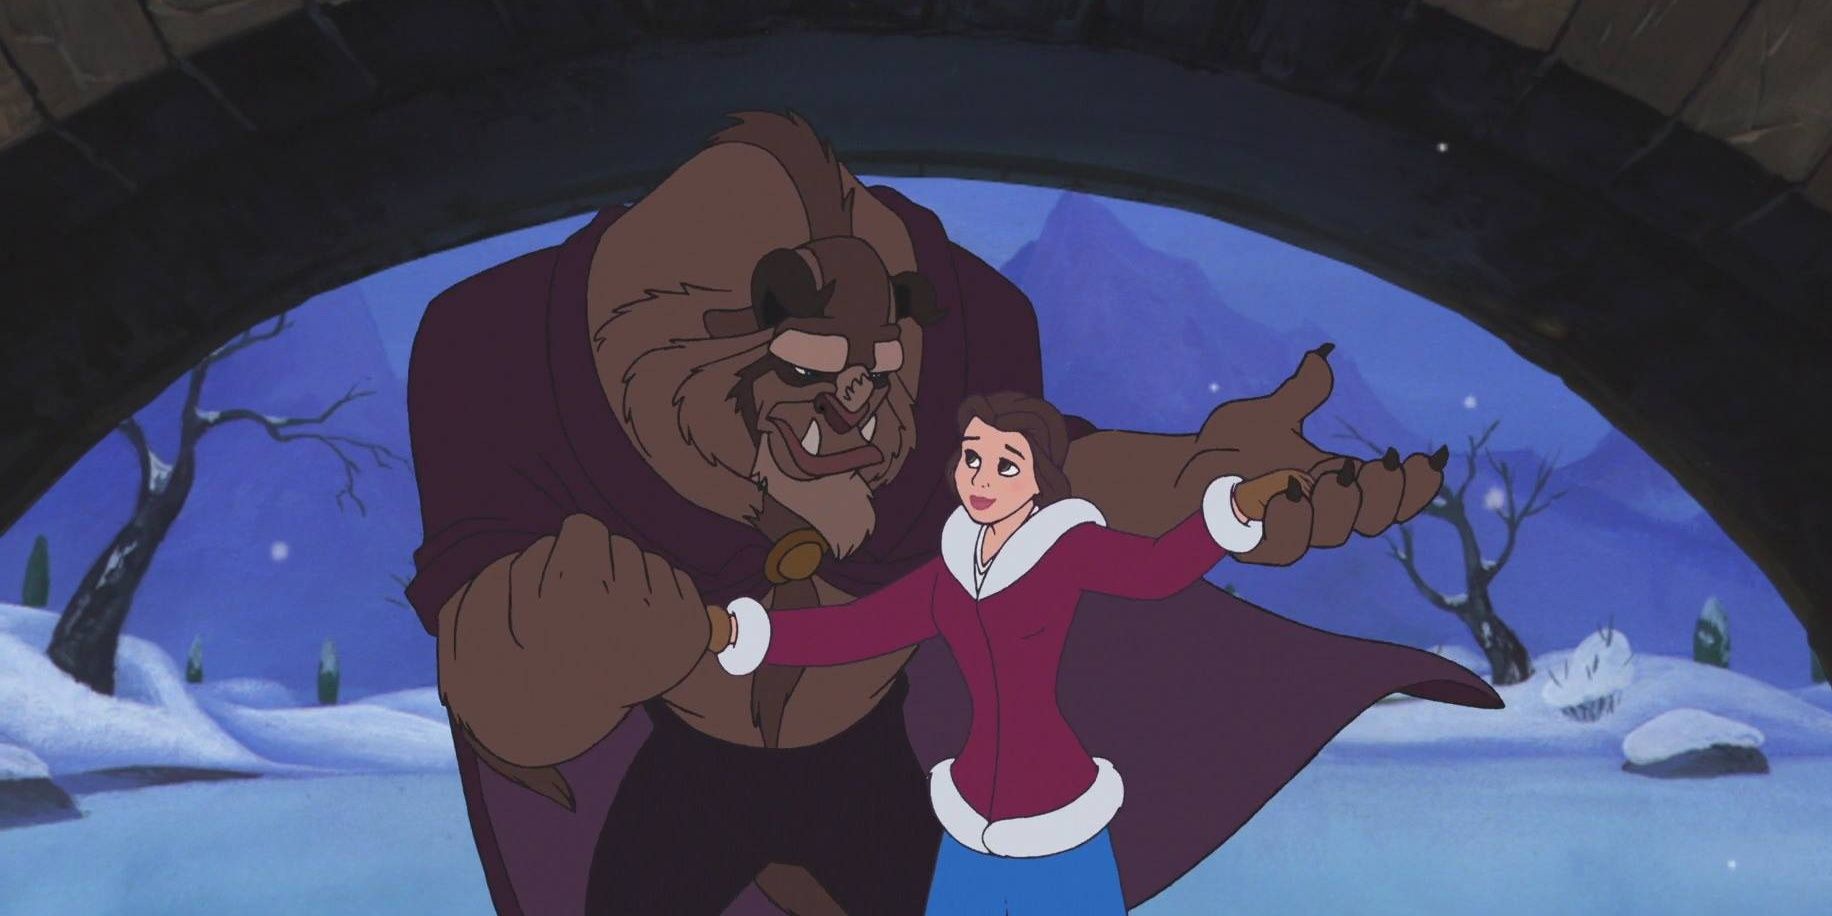 The Beast and Belle skating together